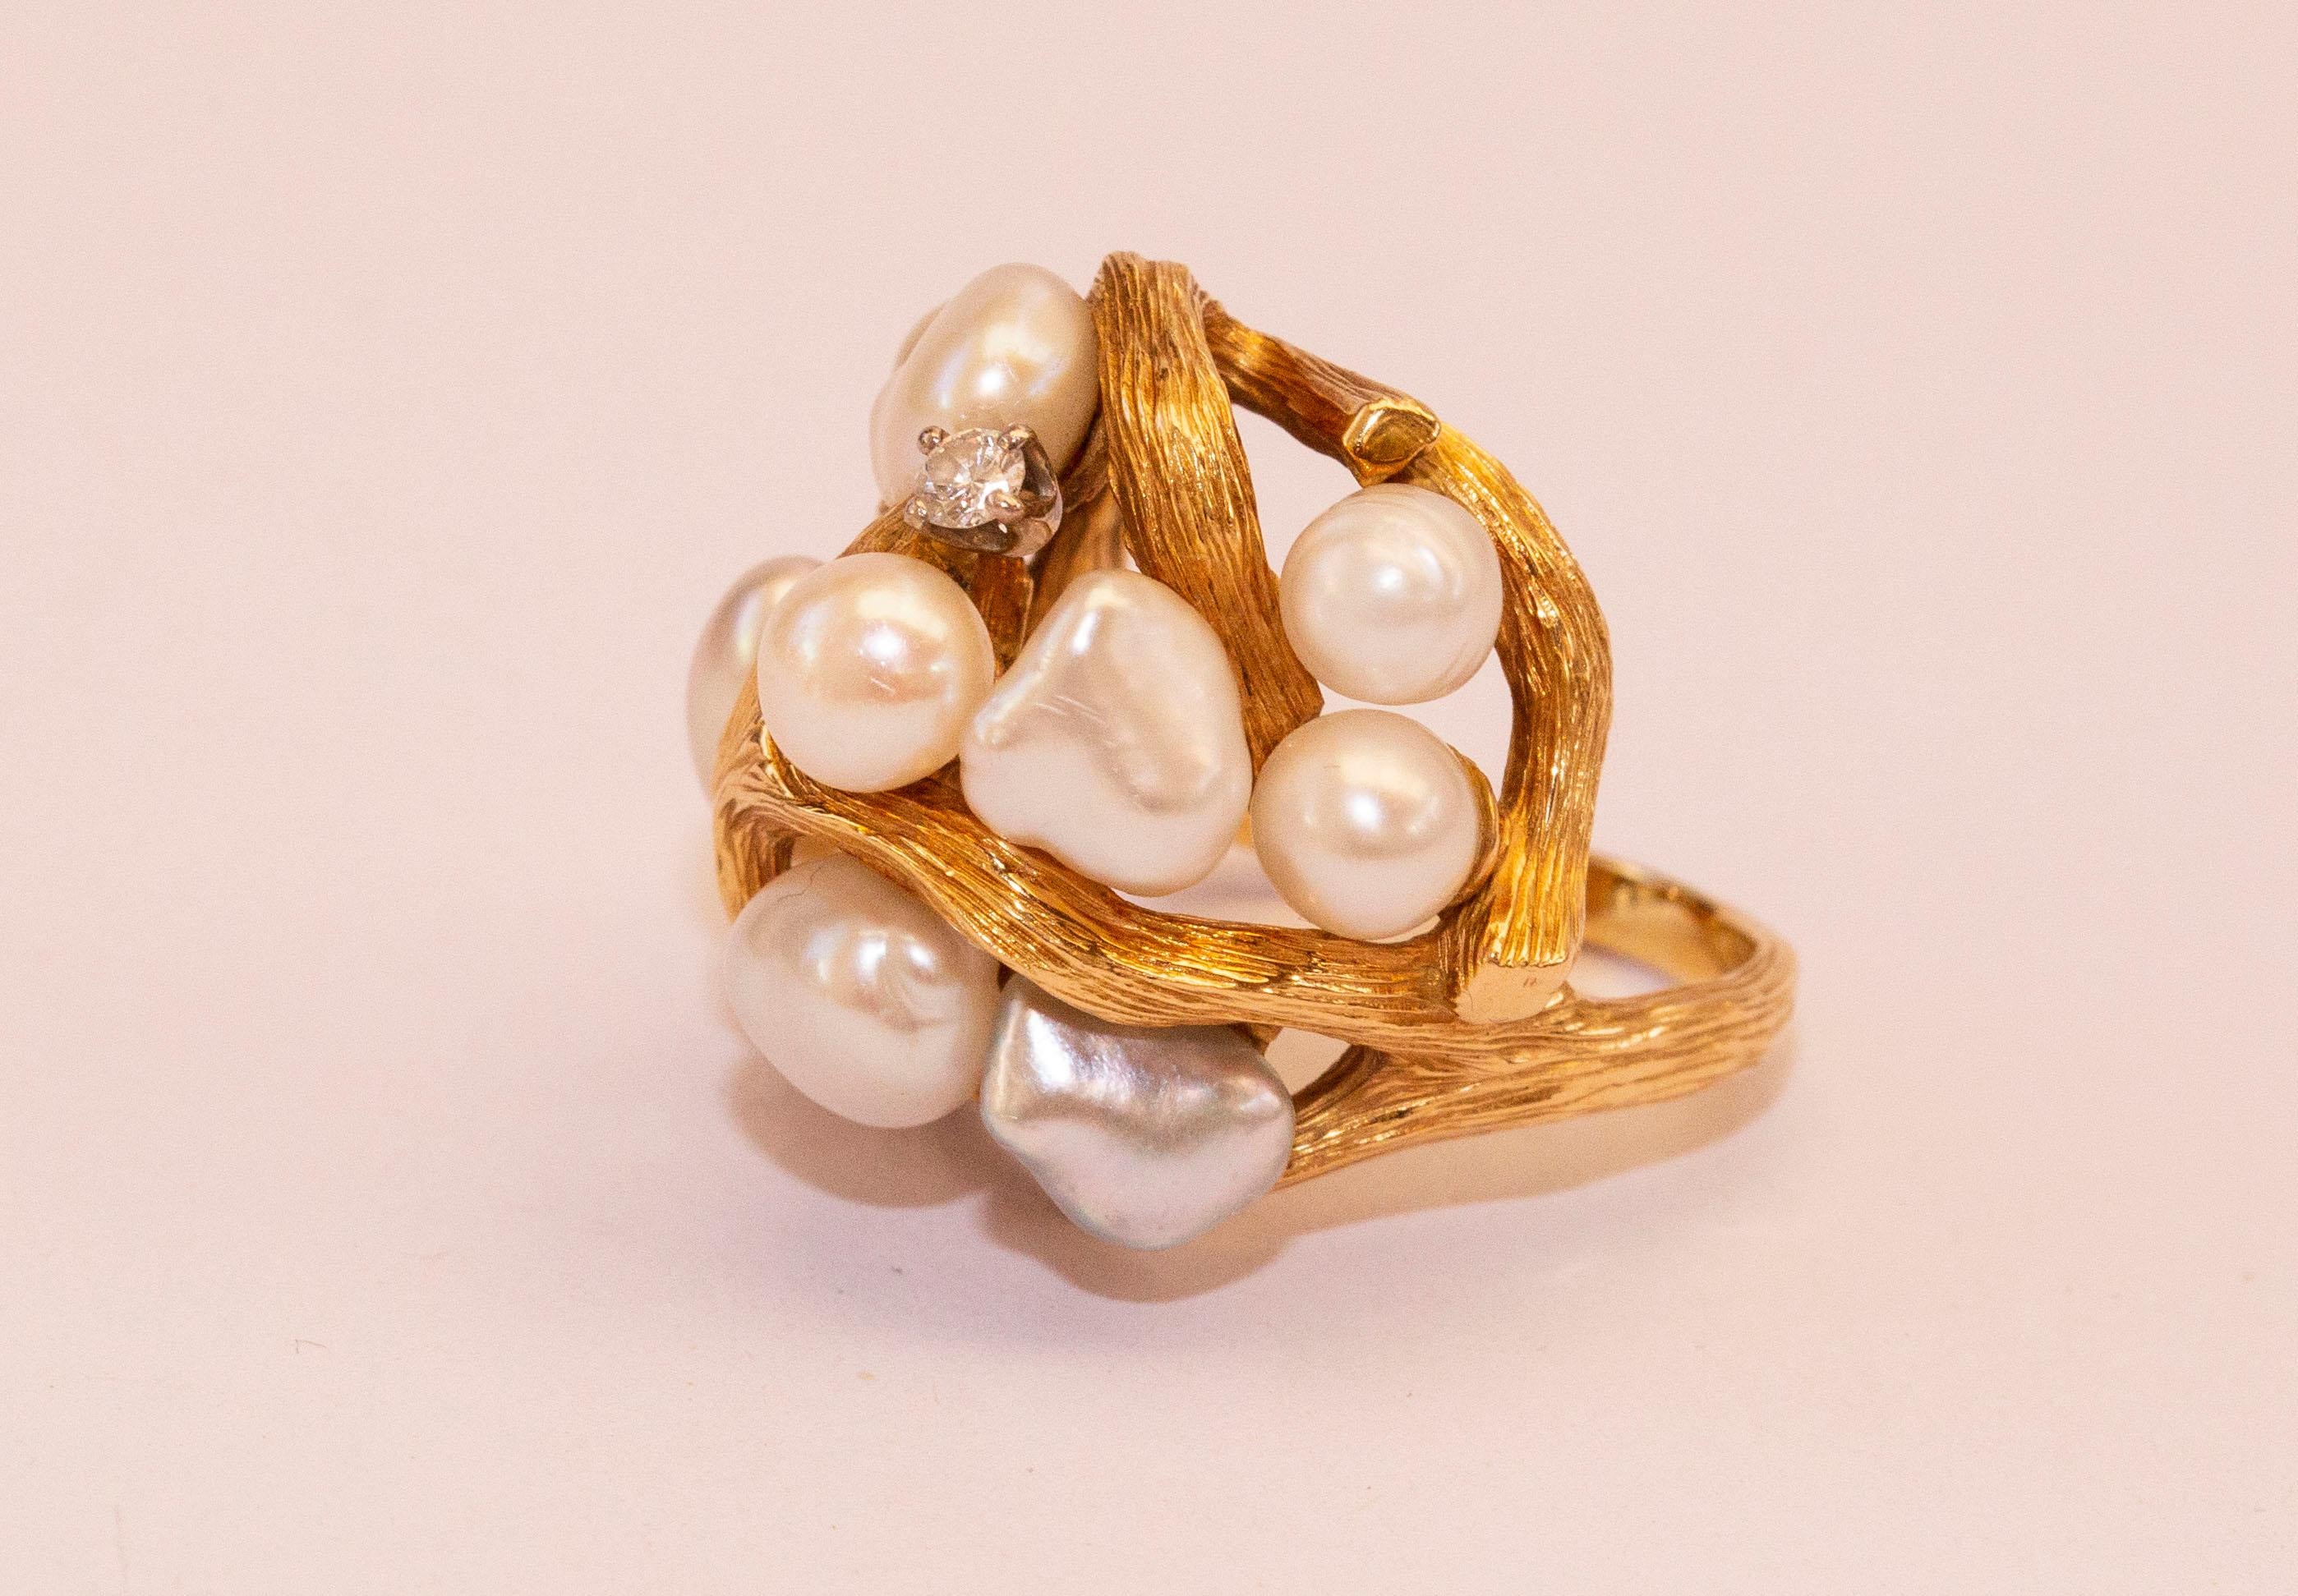 18 Karat Yellow Gold Brutalist Organic Cocktail Ring with Pearls and Diamond For Sale 2